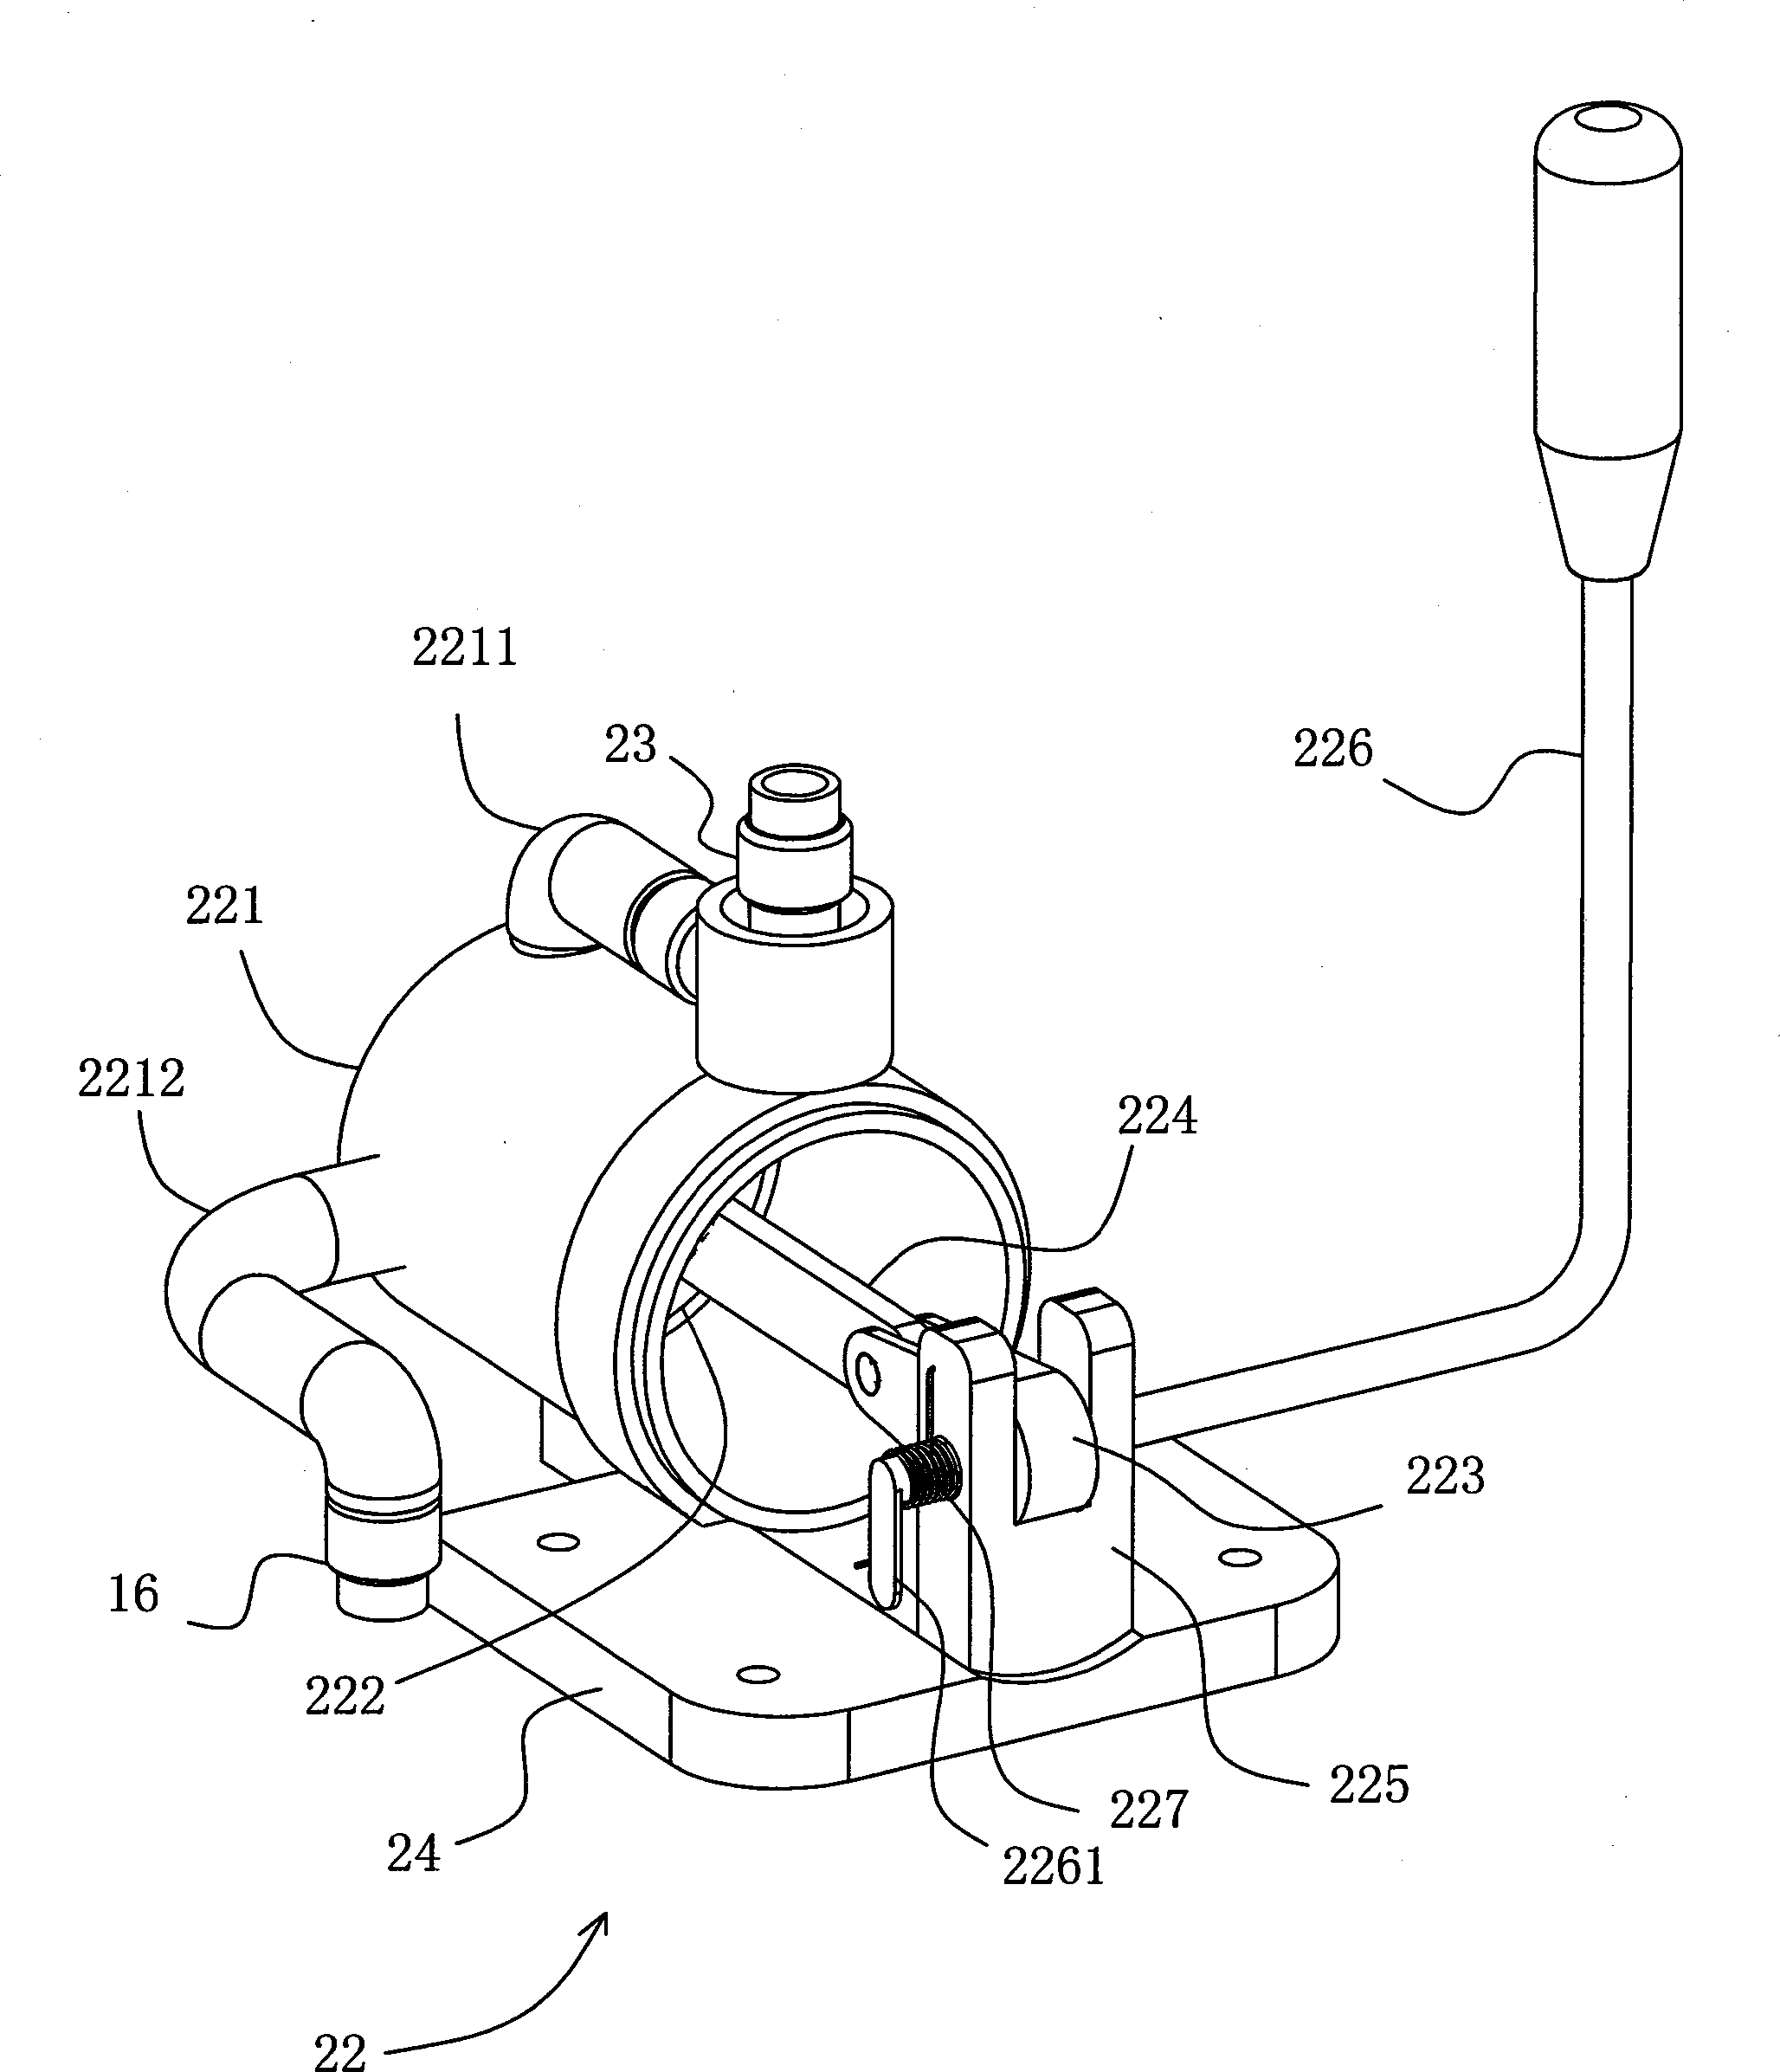 Sprayer with water adsorption function